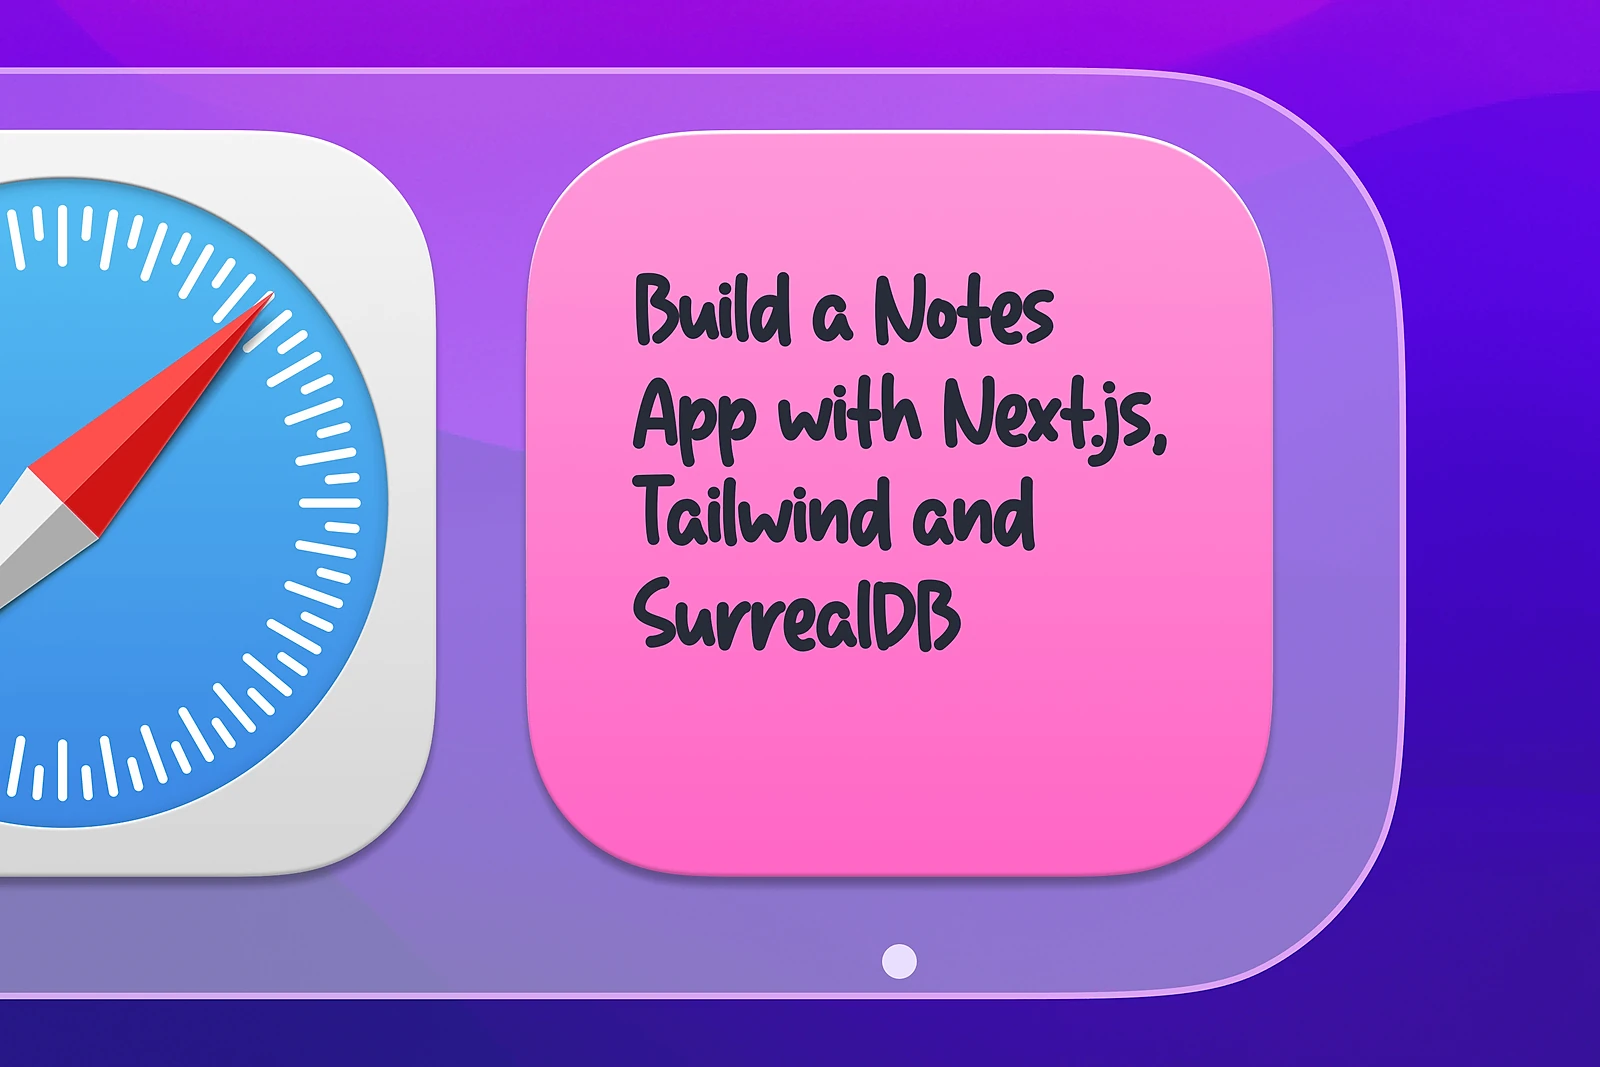 Tutorial: Build a Notes App with Next.js, Tailwind and SurrealDB